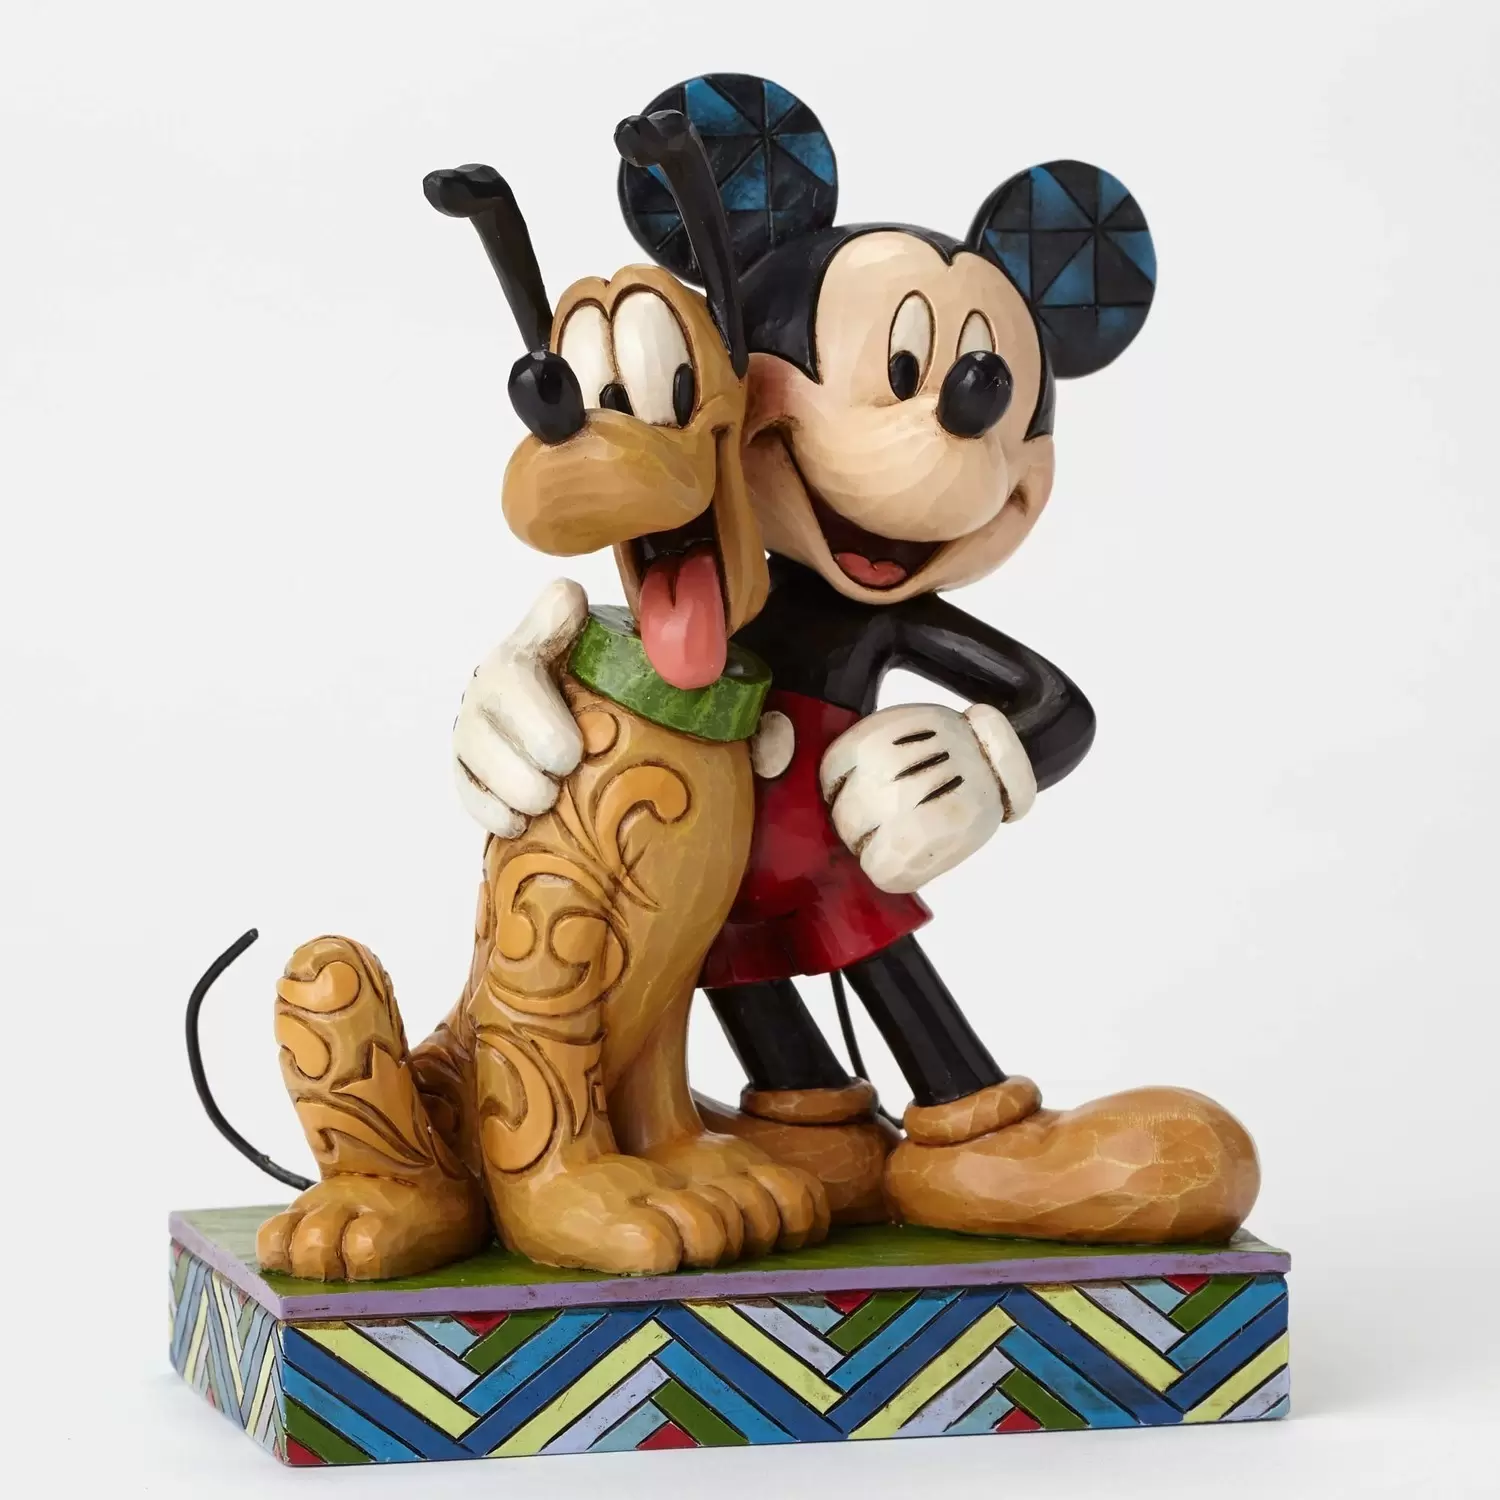 Disney Traditions by Jim Shore - Best Pals - Mickey and Pluto